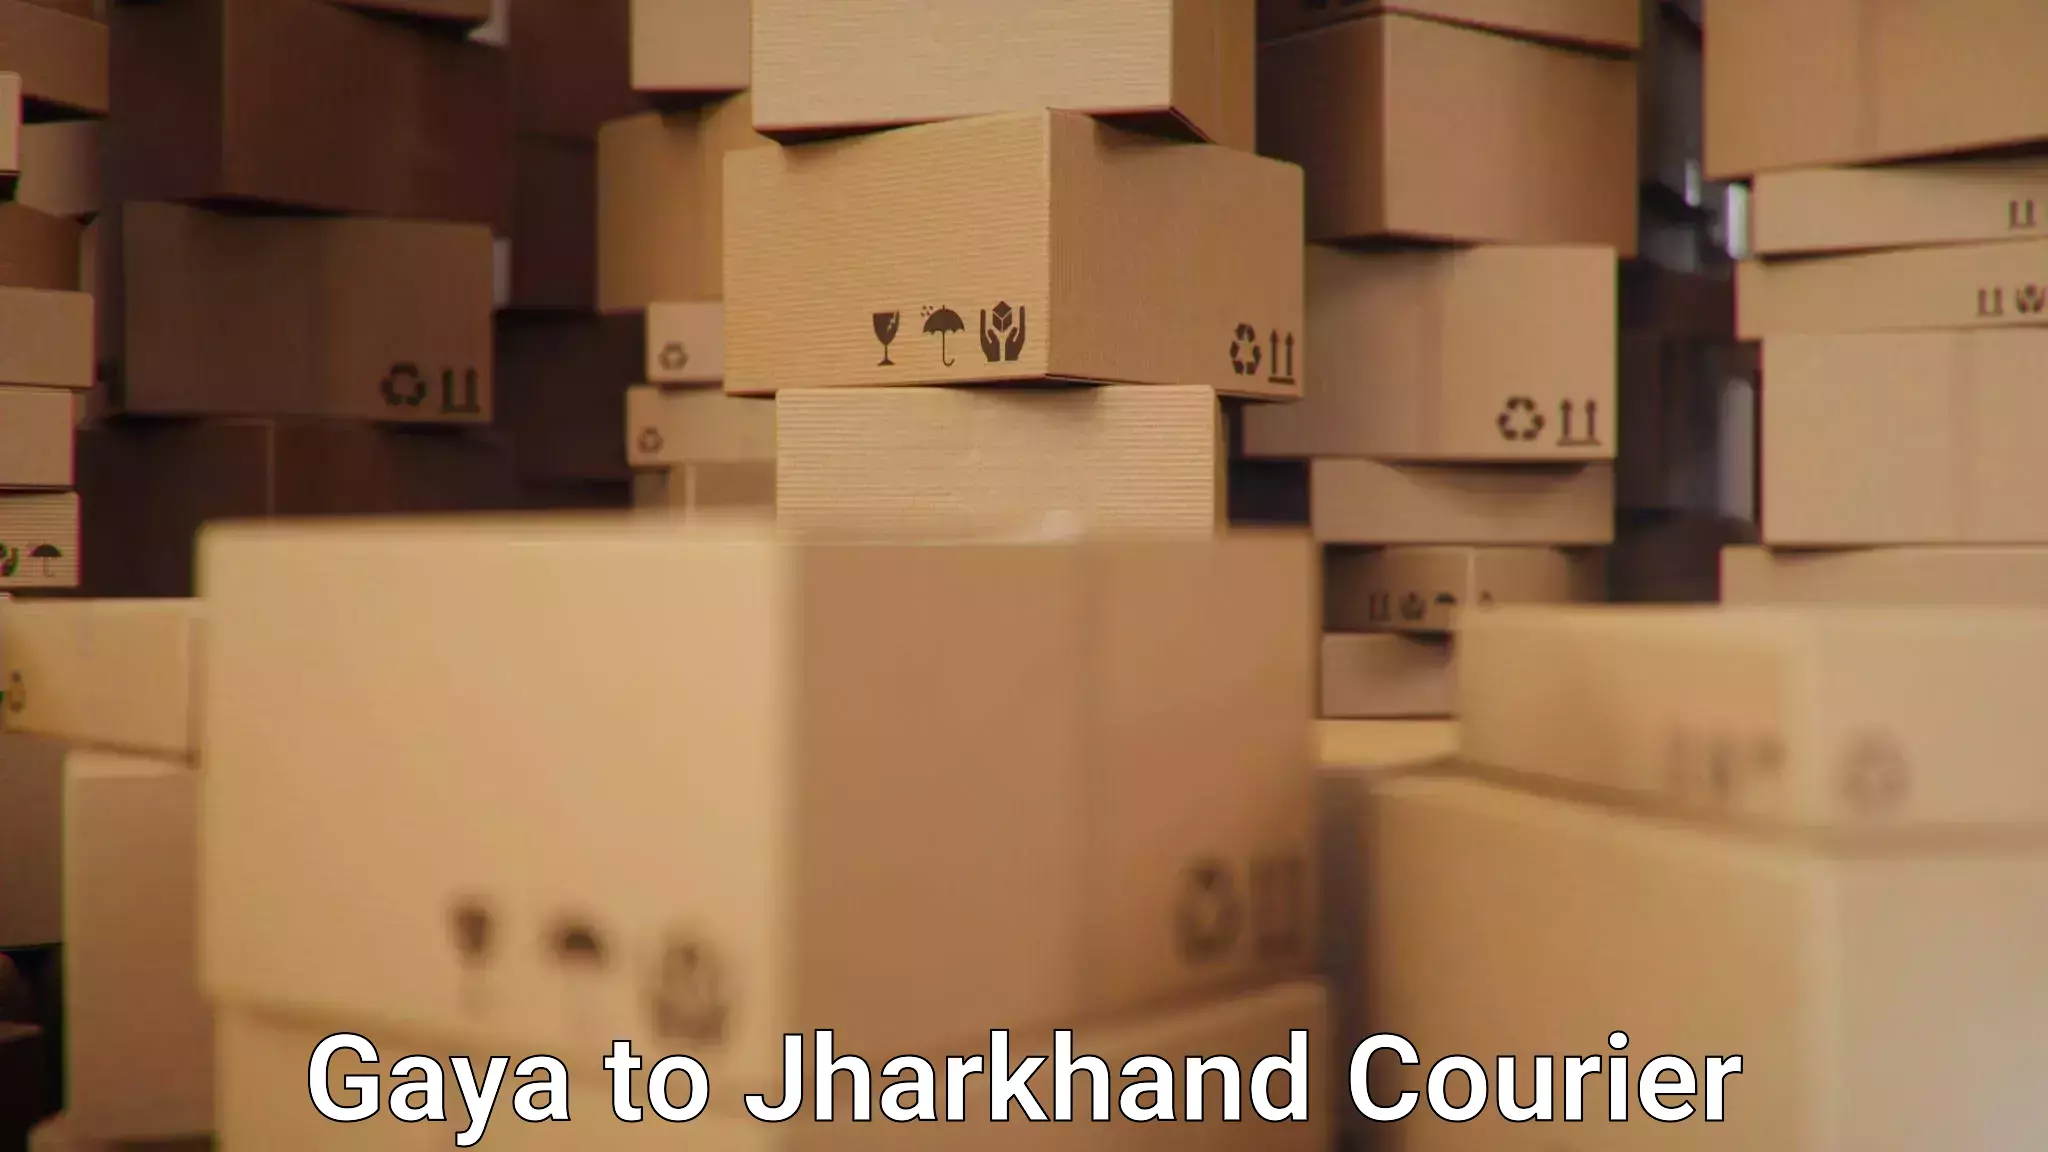 Express delivery capabilities Gaya to Jharkhand